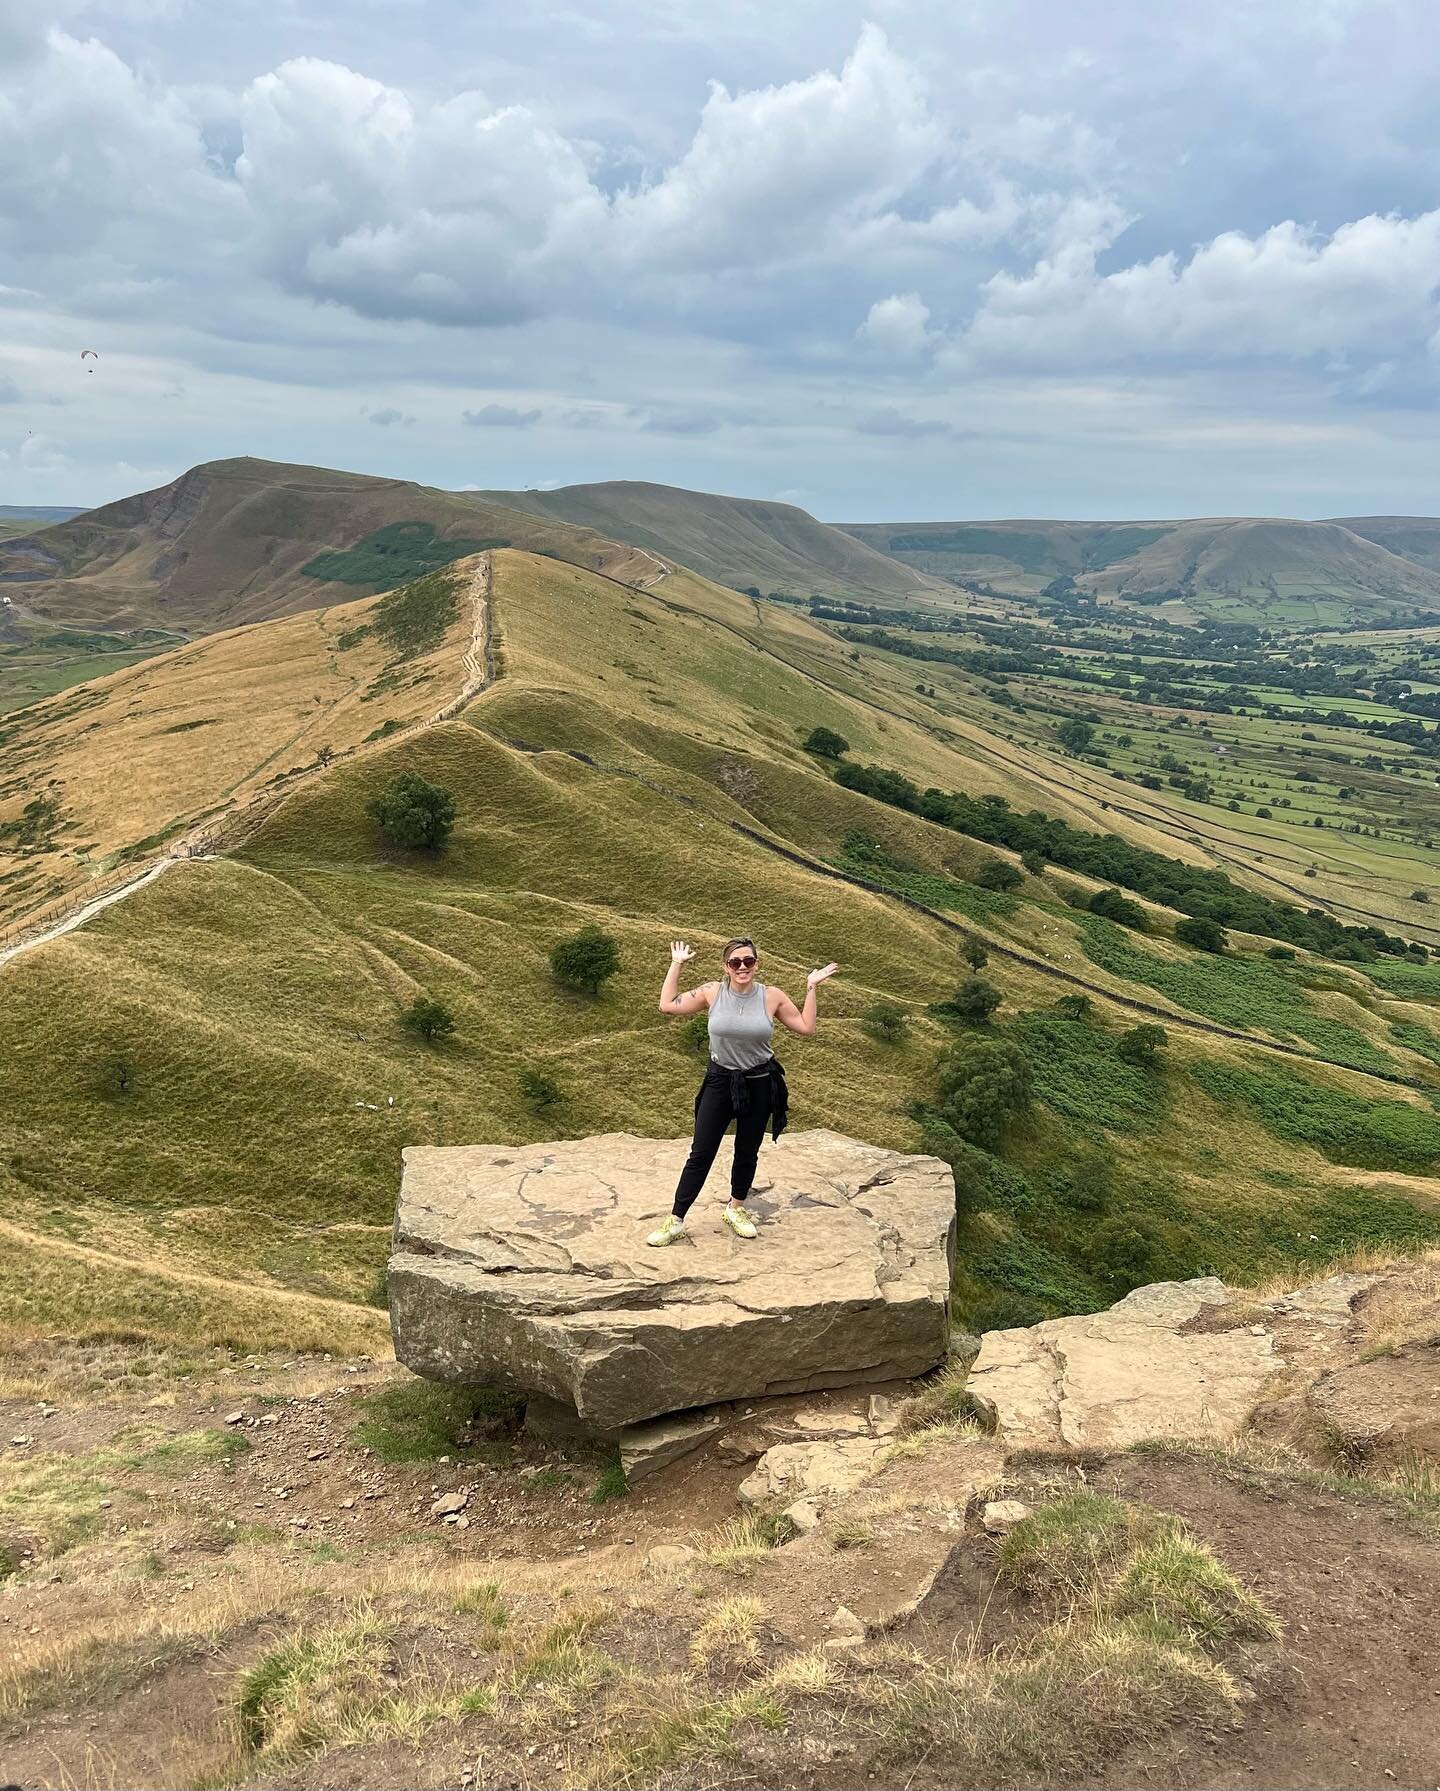 Recharged by nature ⛰🍃

Guys, I&rsquo;m back from my adventure and I&rsquo;m here to report Mam Tor was such a rewarding hike. Relatively steep climb but worth it when you get to the top. I loved the view and breath up high.

Work / Life balance is 